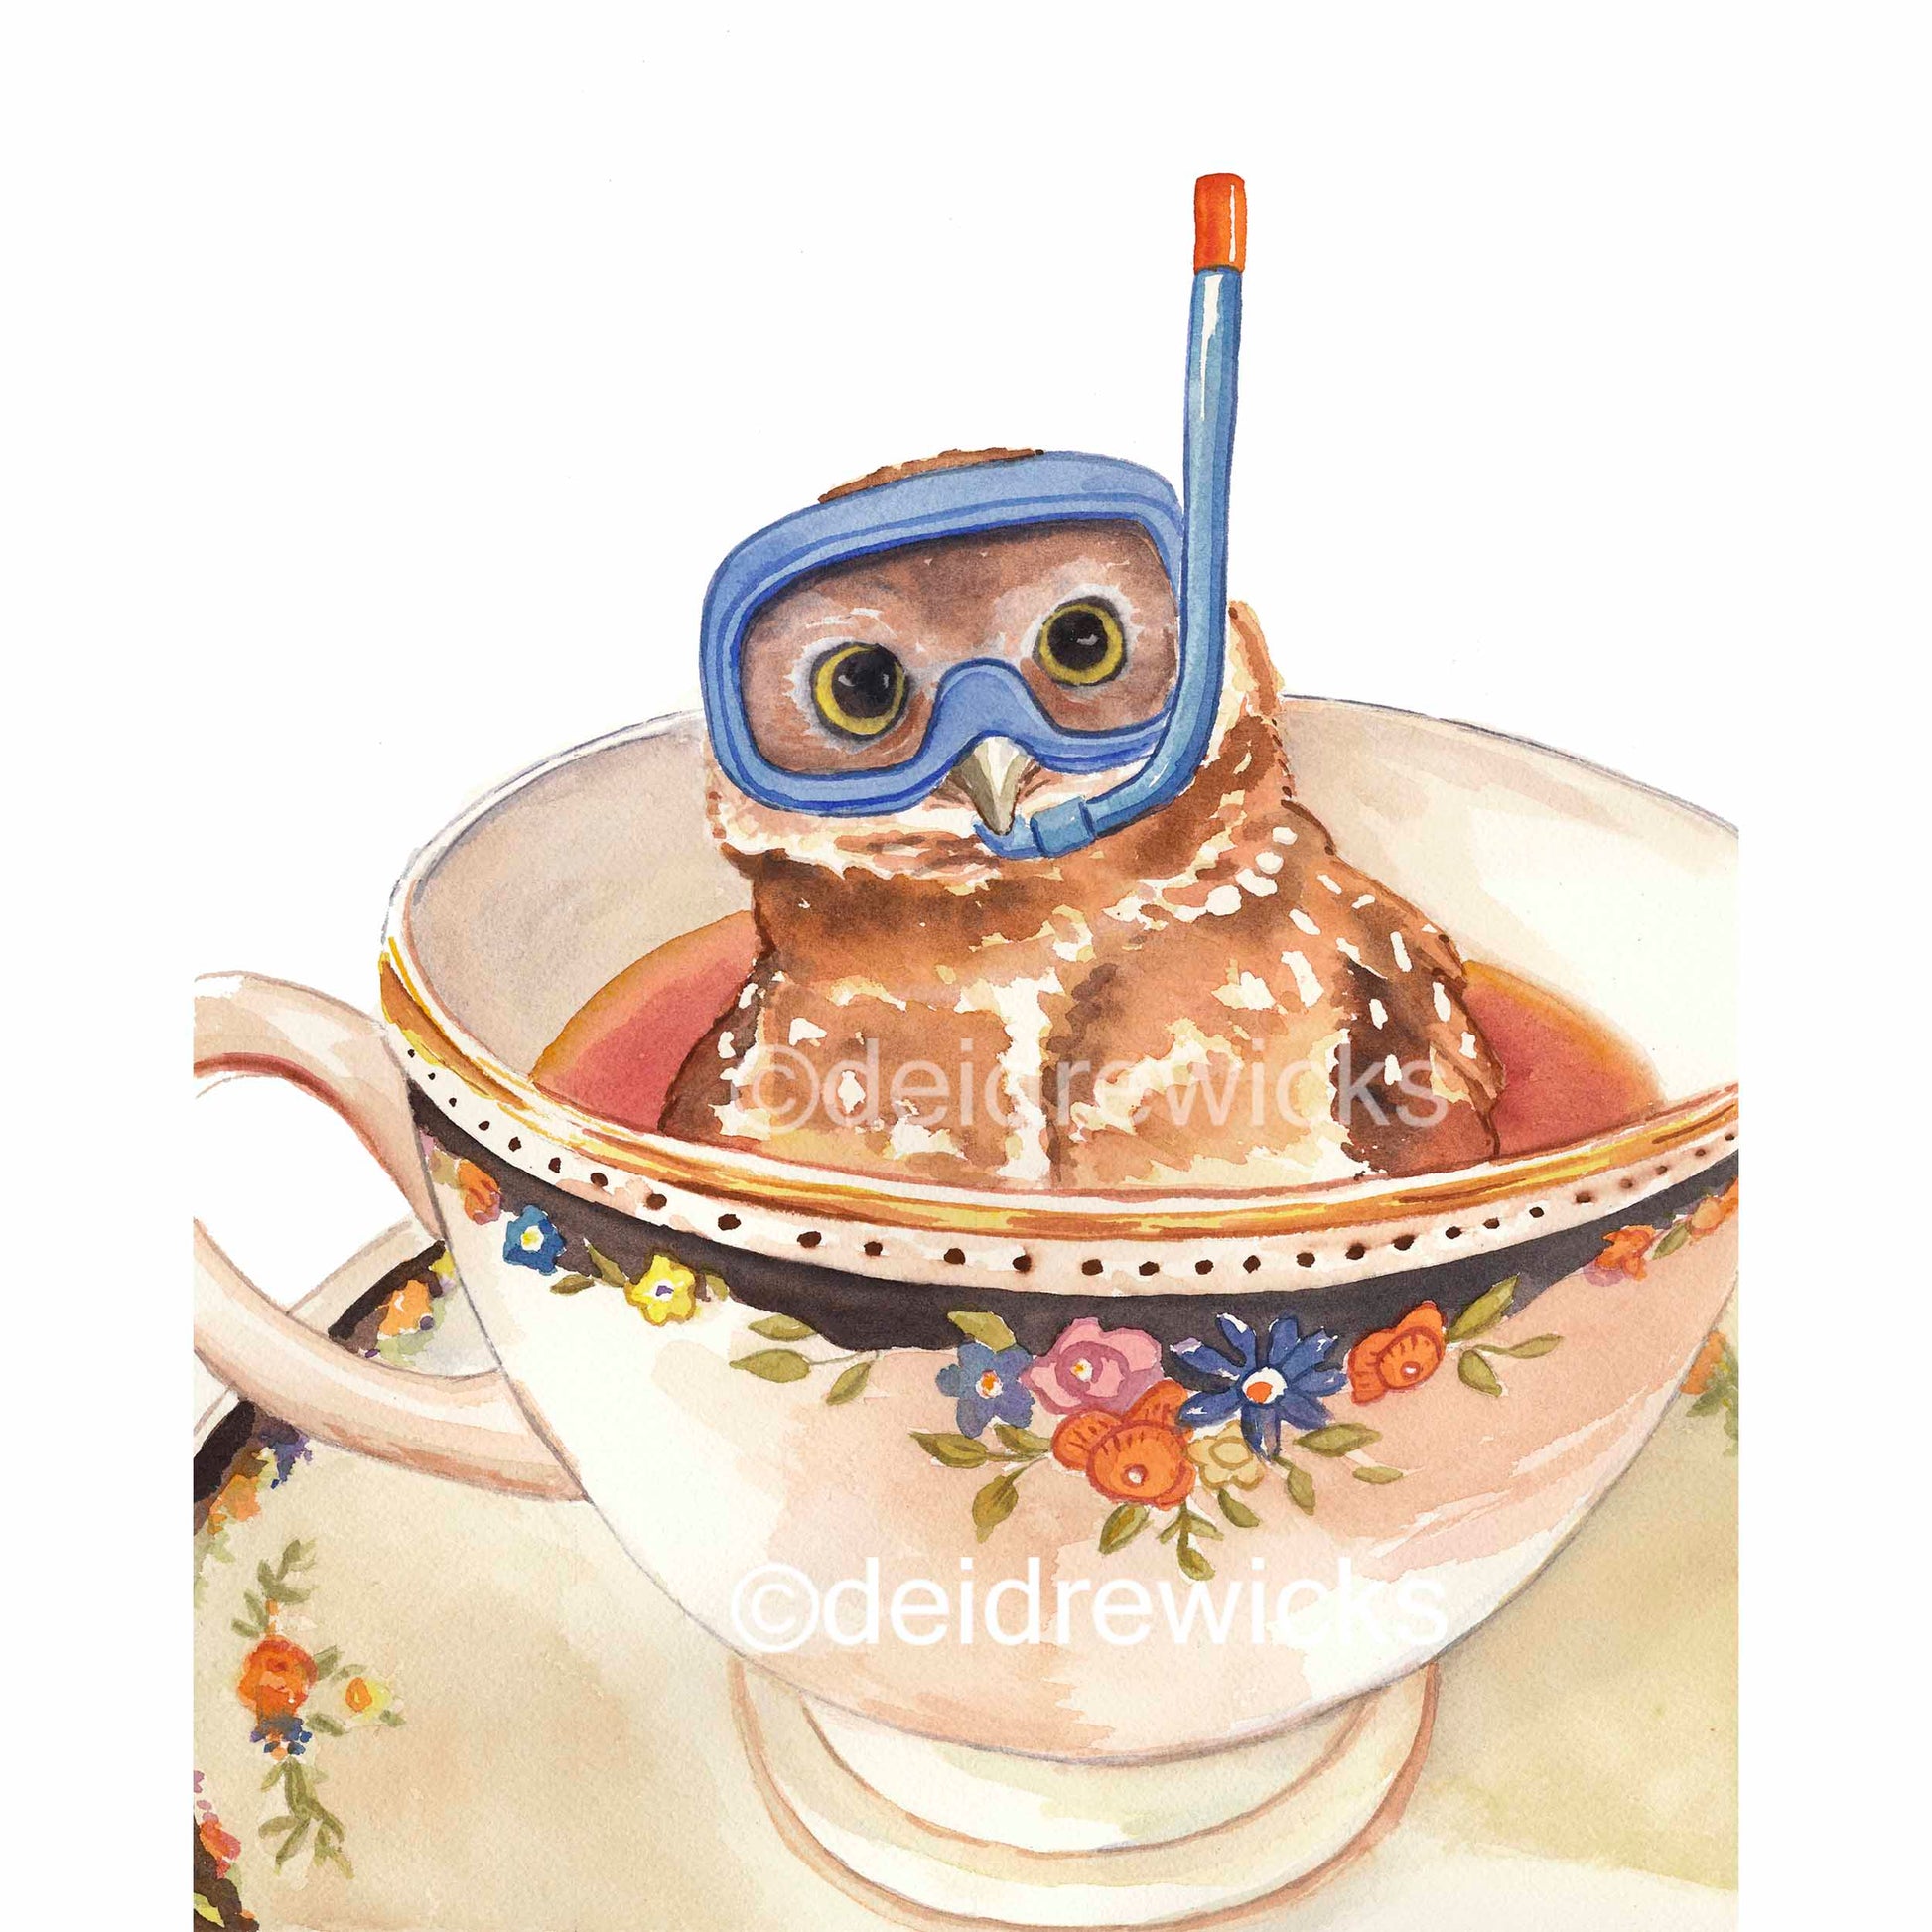 Watercolour painting of an owl snorkeling in a vintage tea cup